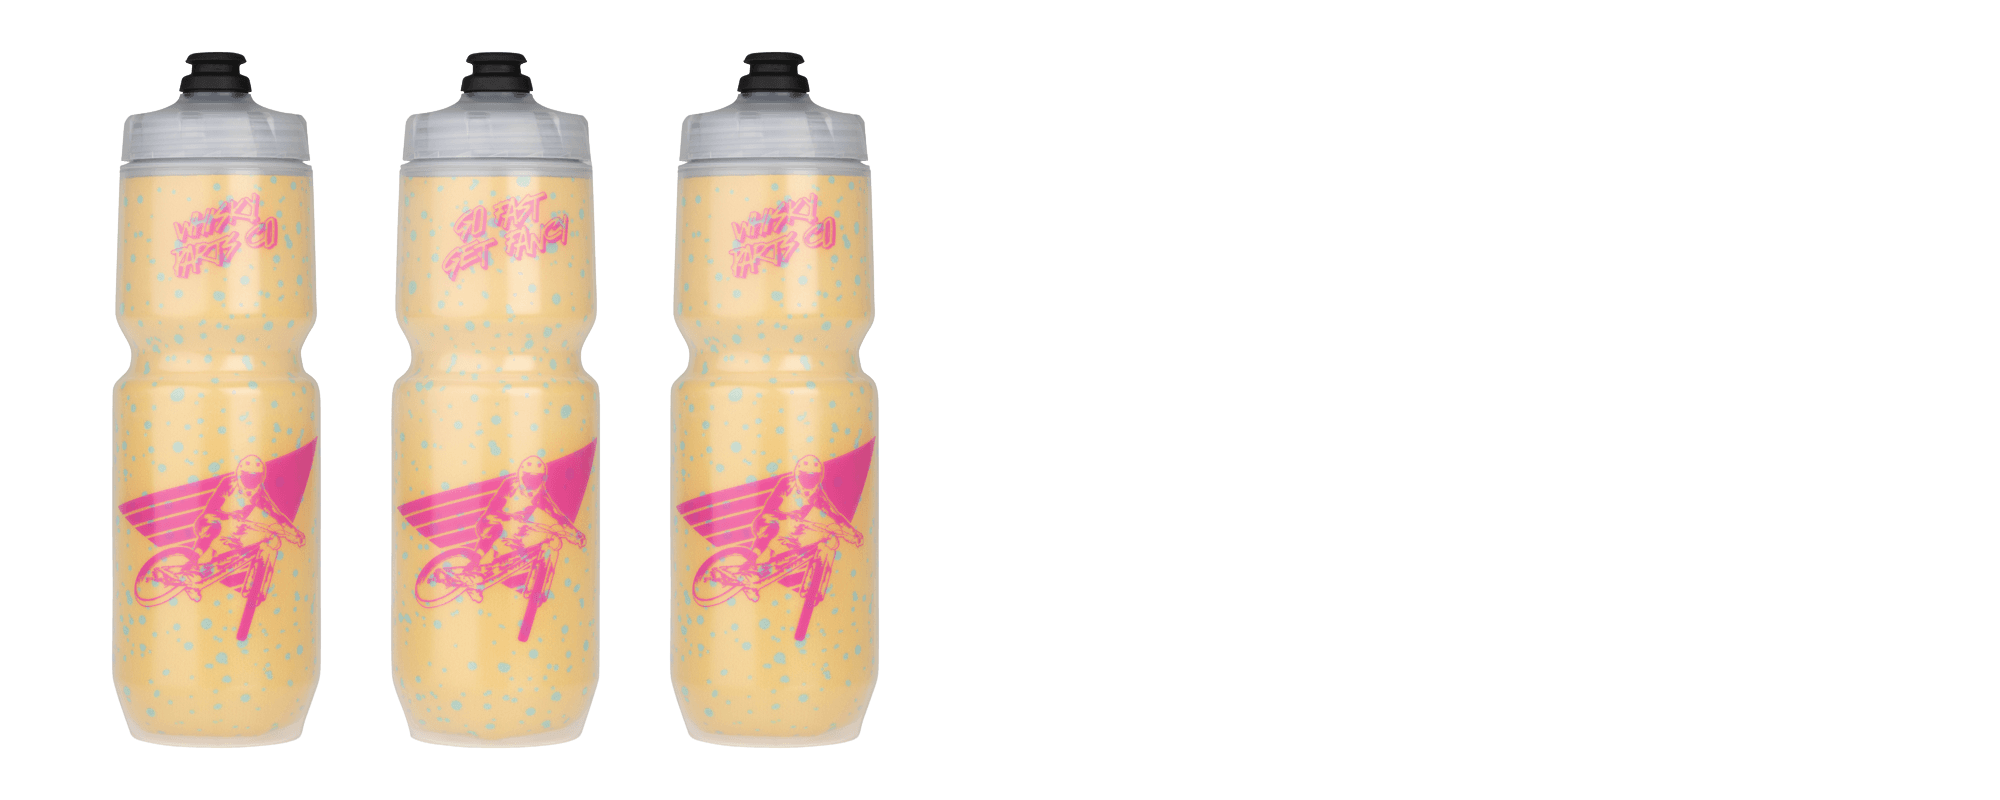 Whisky It's the 90s Insulated Water Bottle - Yellow/Pink - Front and Back shown